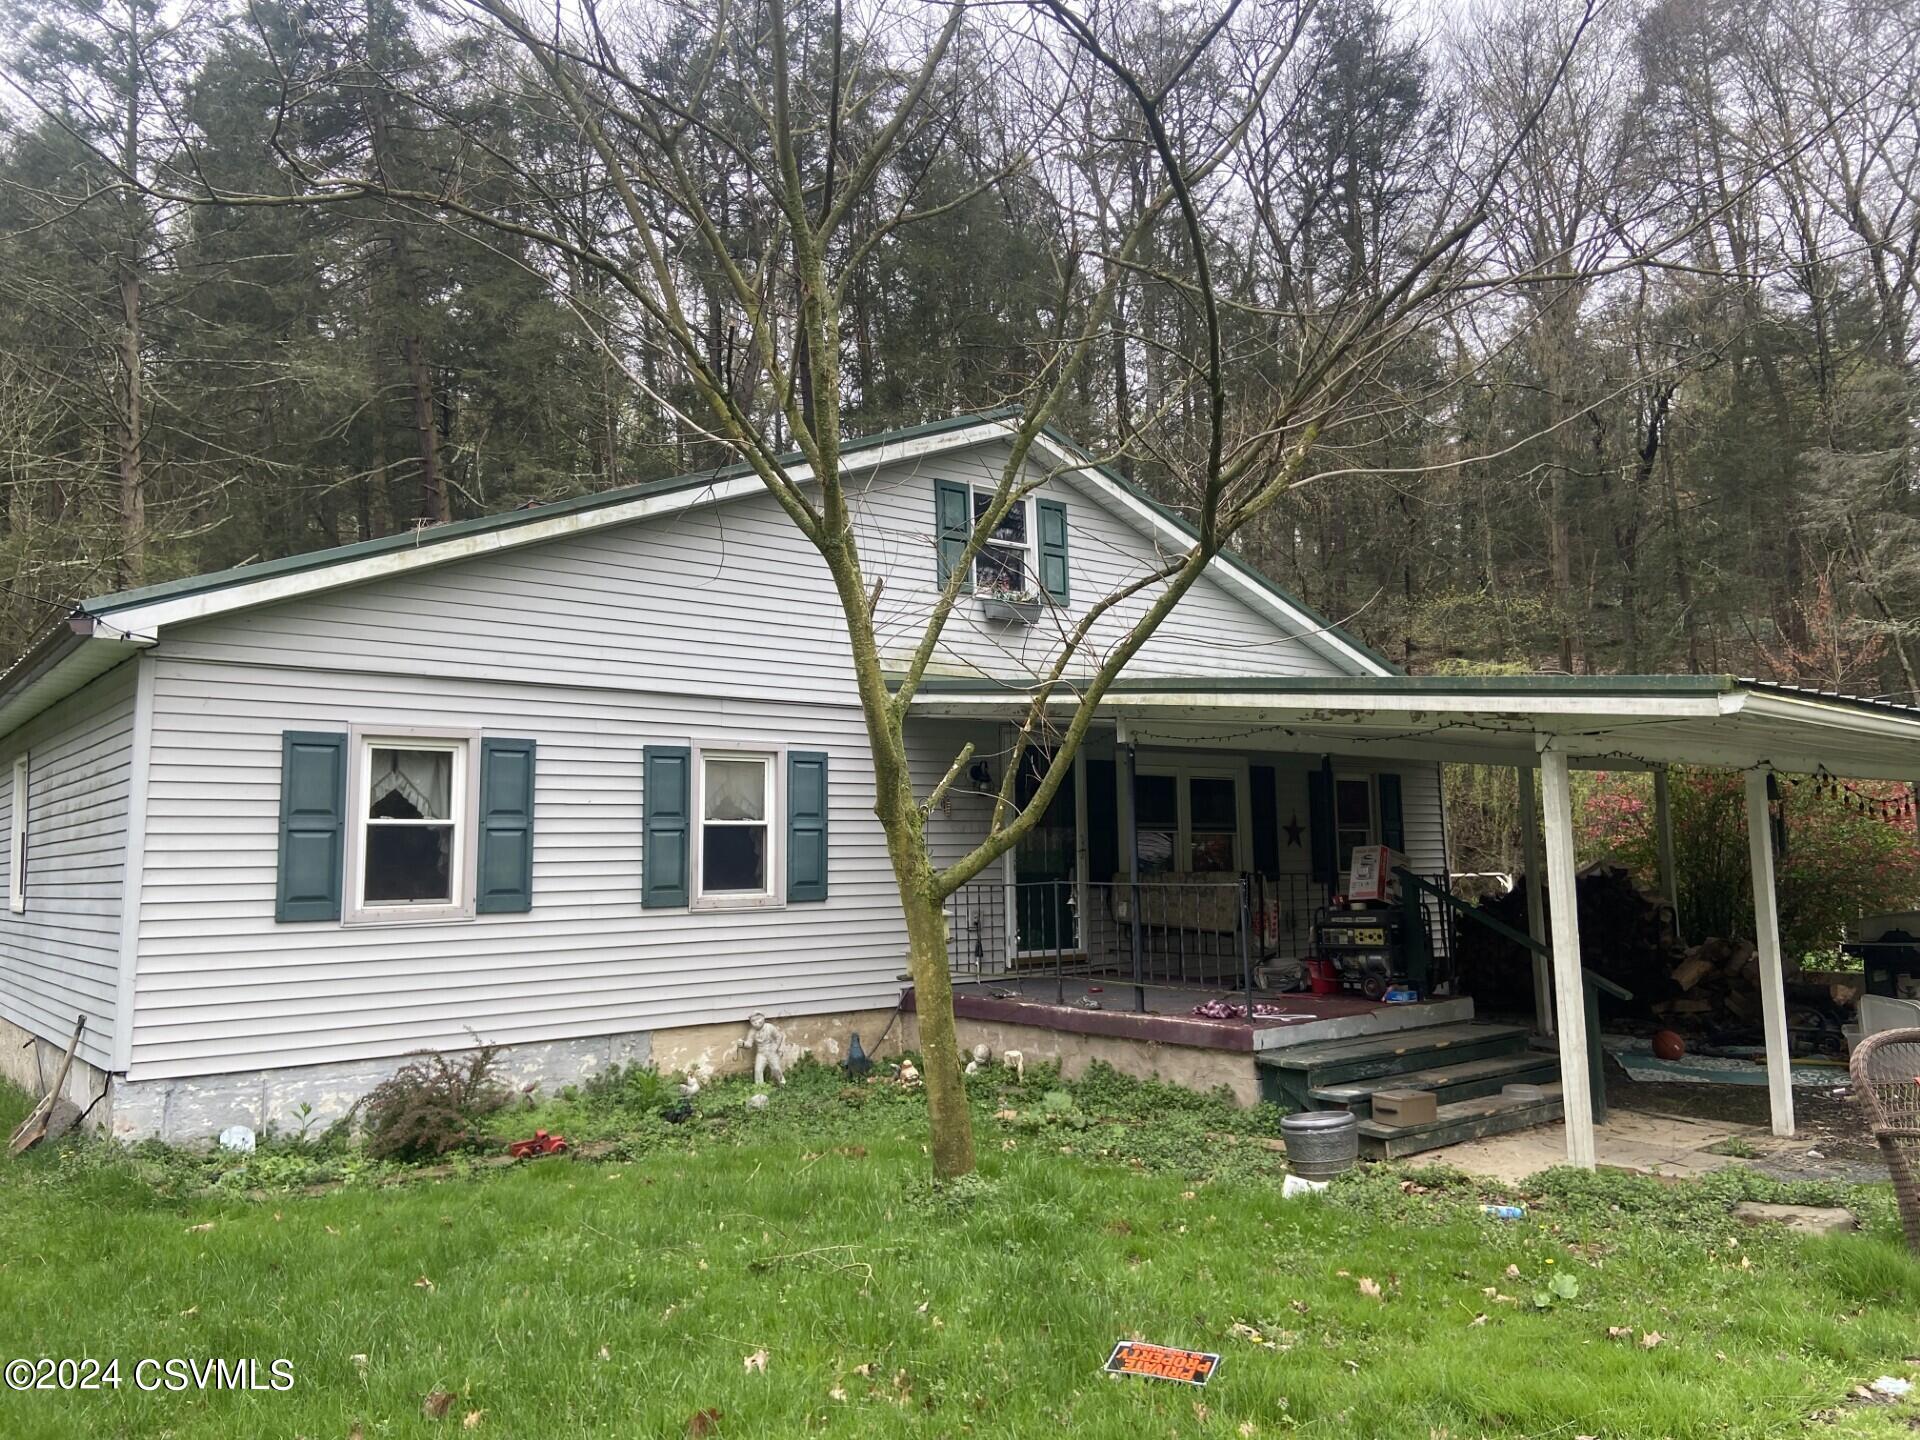 Property: 129 Spring House Road,Northumberland, PA